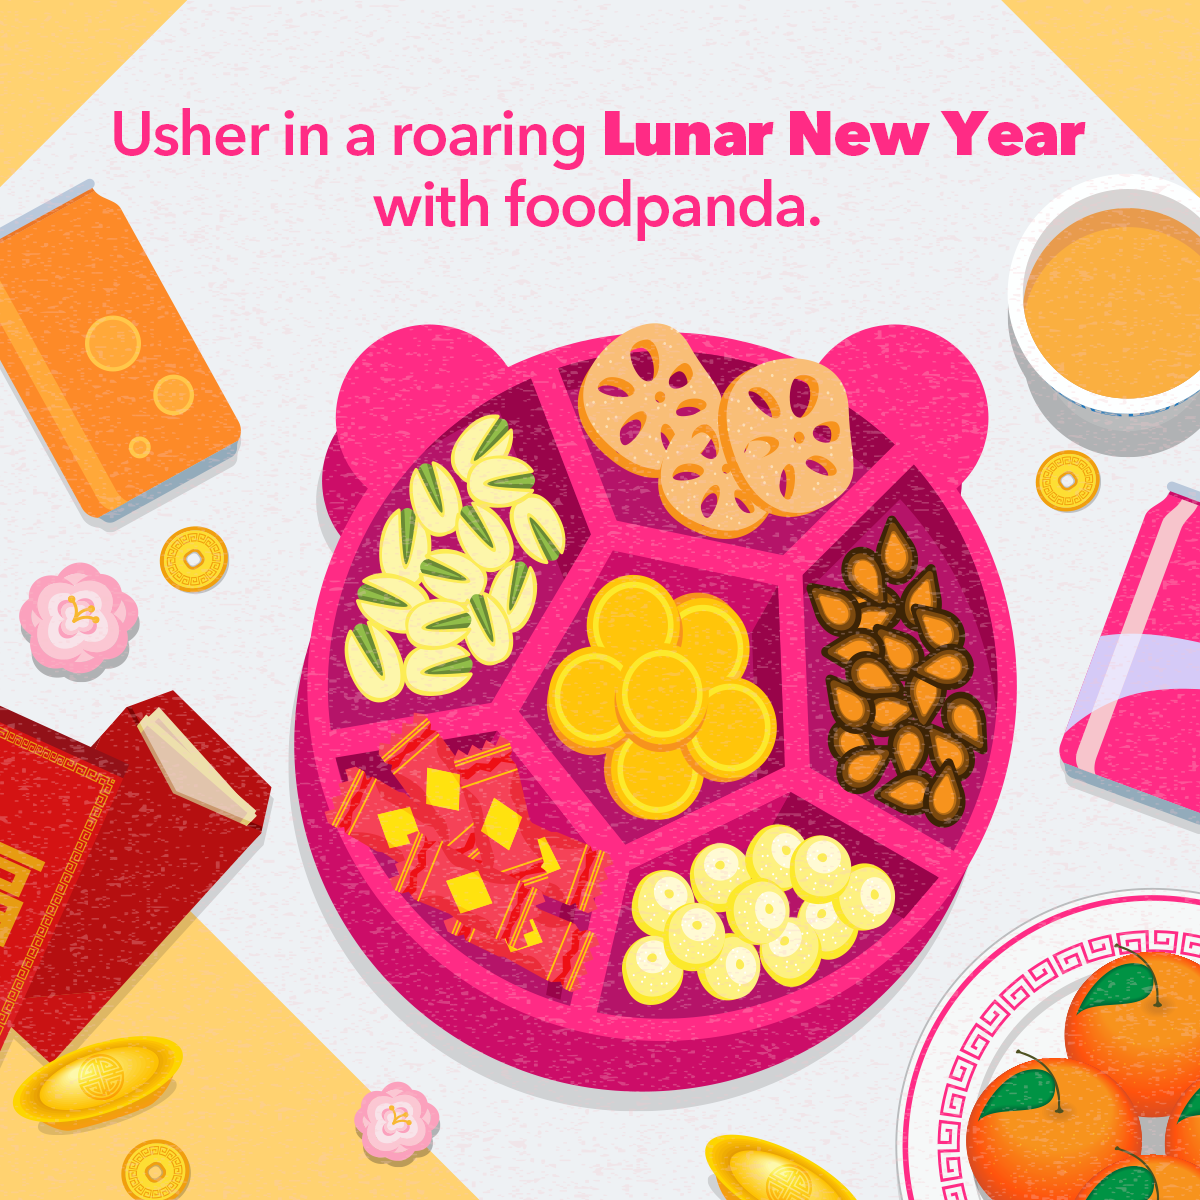 10 must-have Lunar New Year essentials on foodpanda to usher in a roaring Year of the Tiger